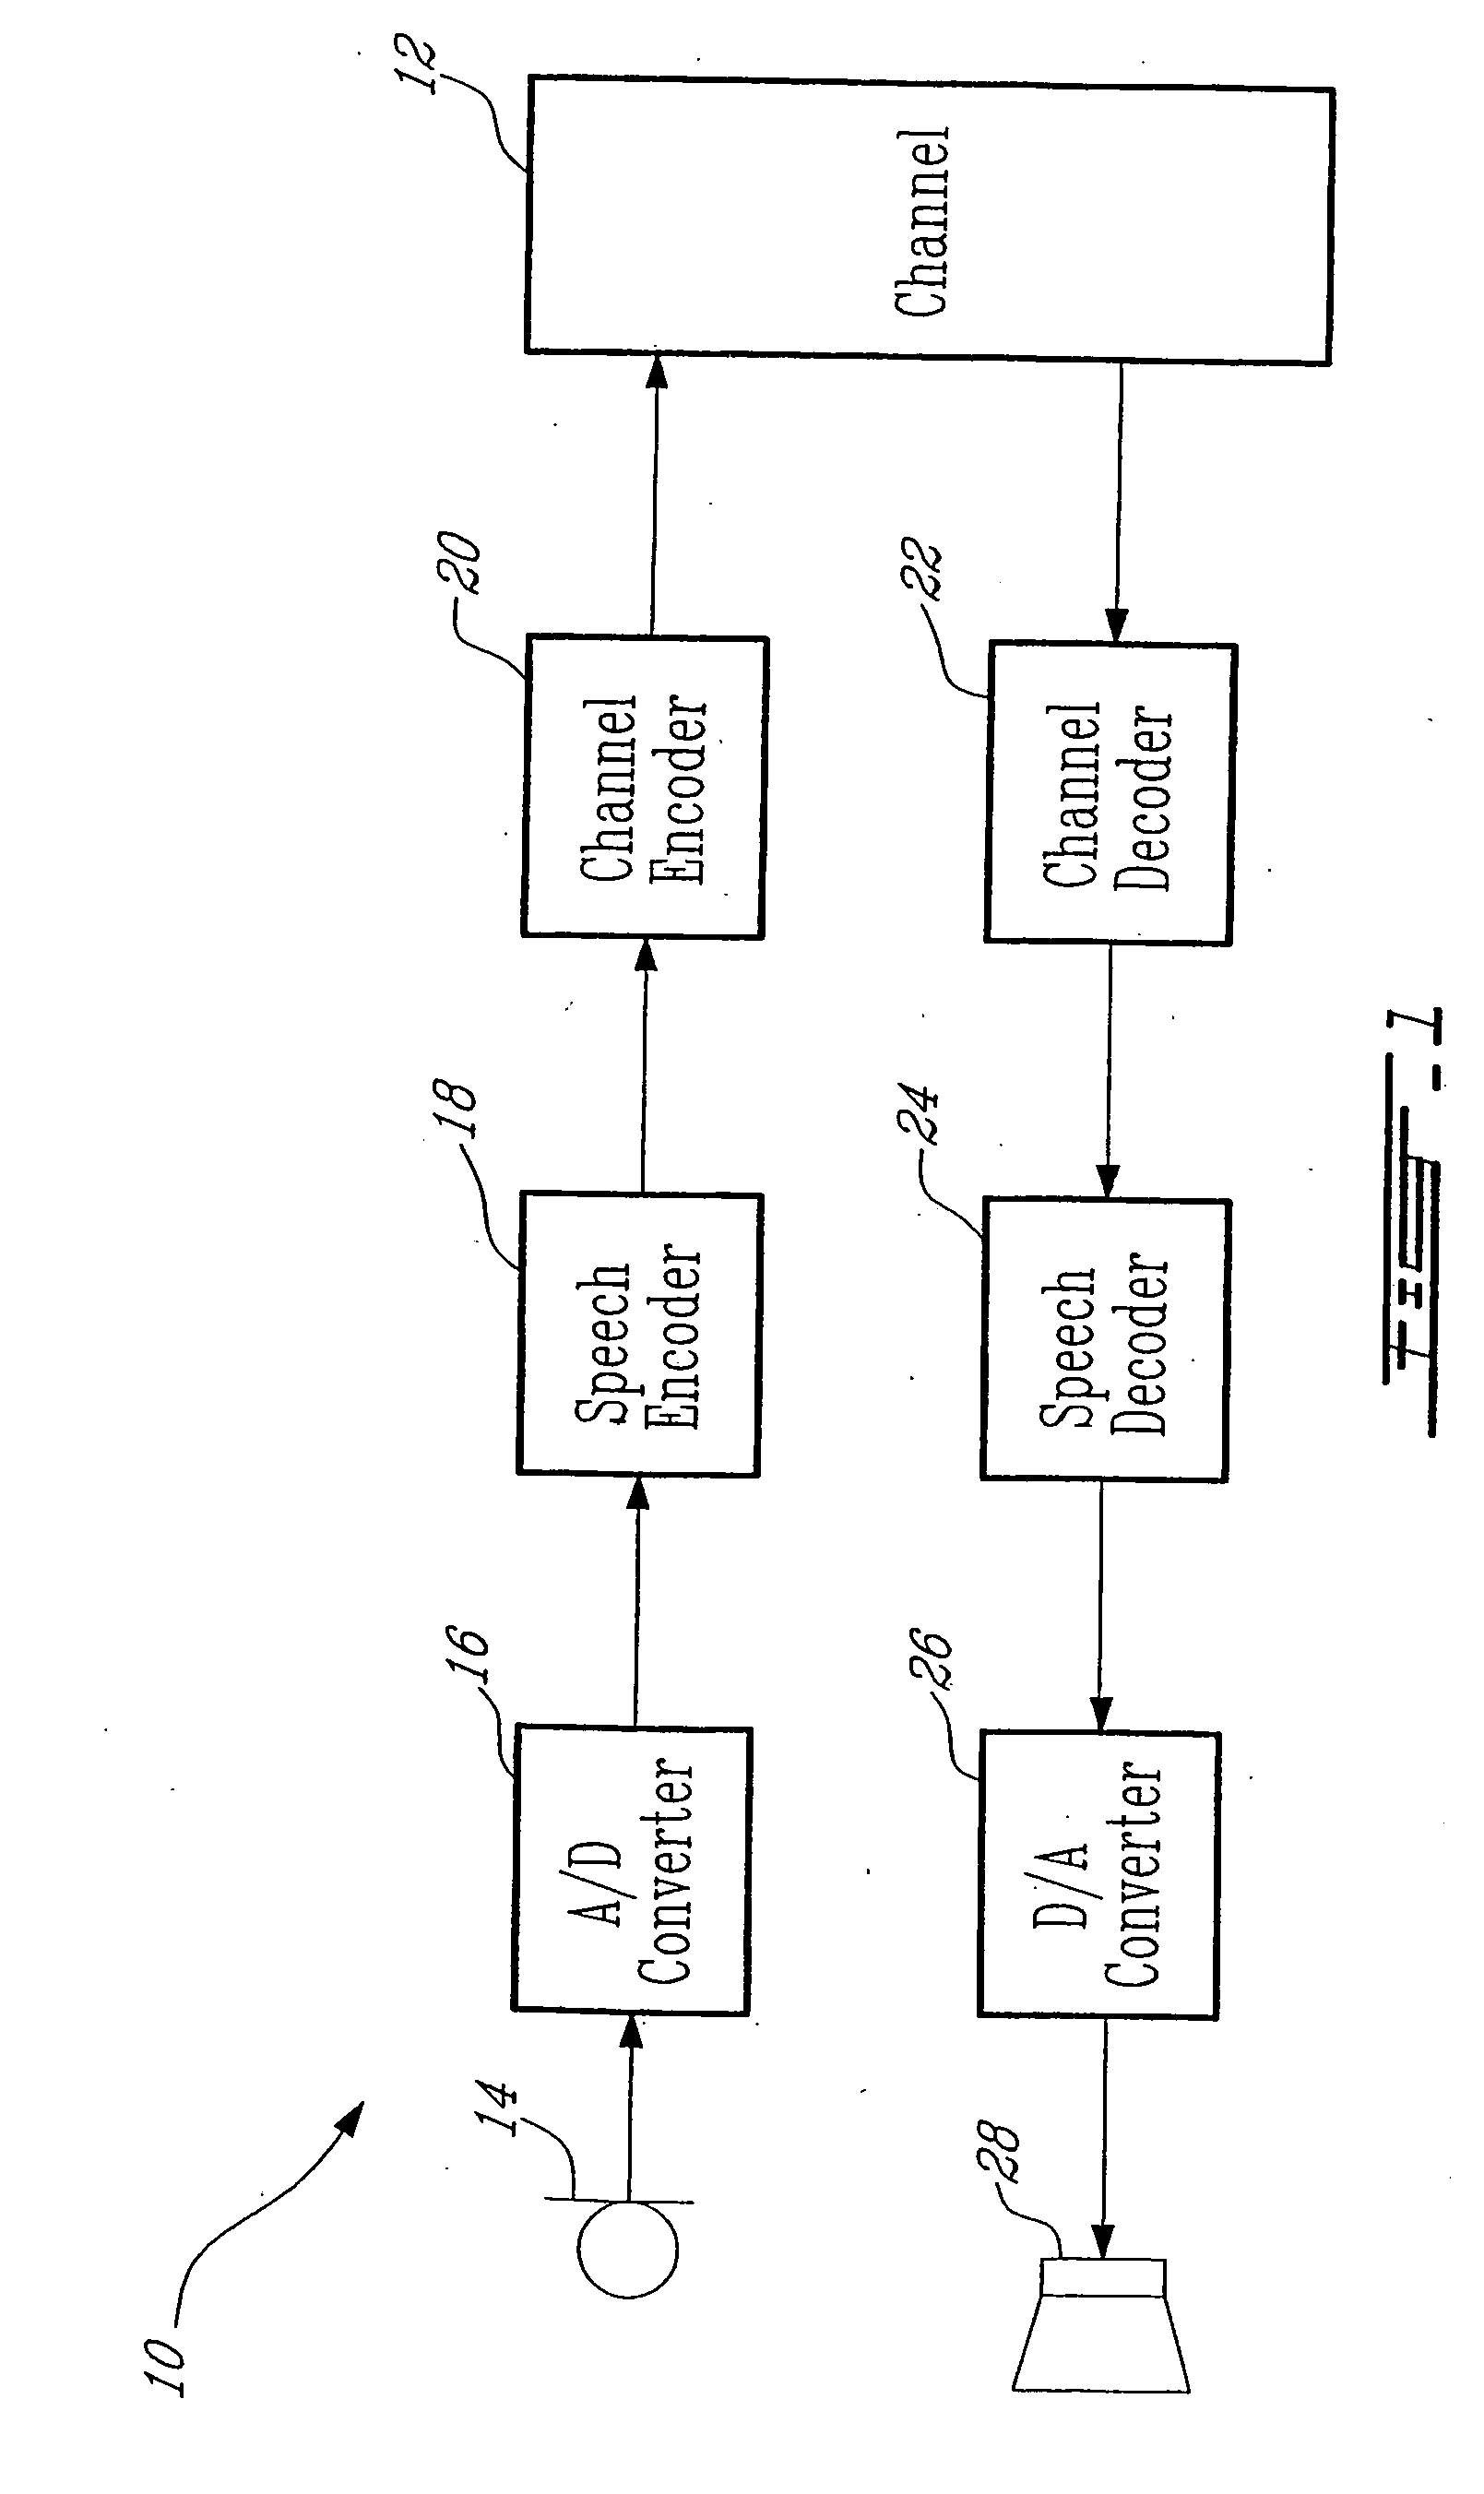 Methods and devices for source controlled variable bit-rate wideband speech coding